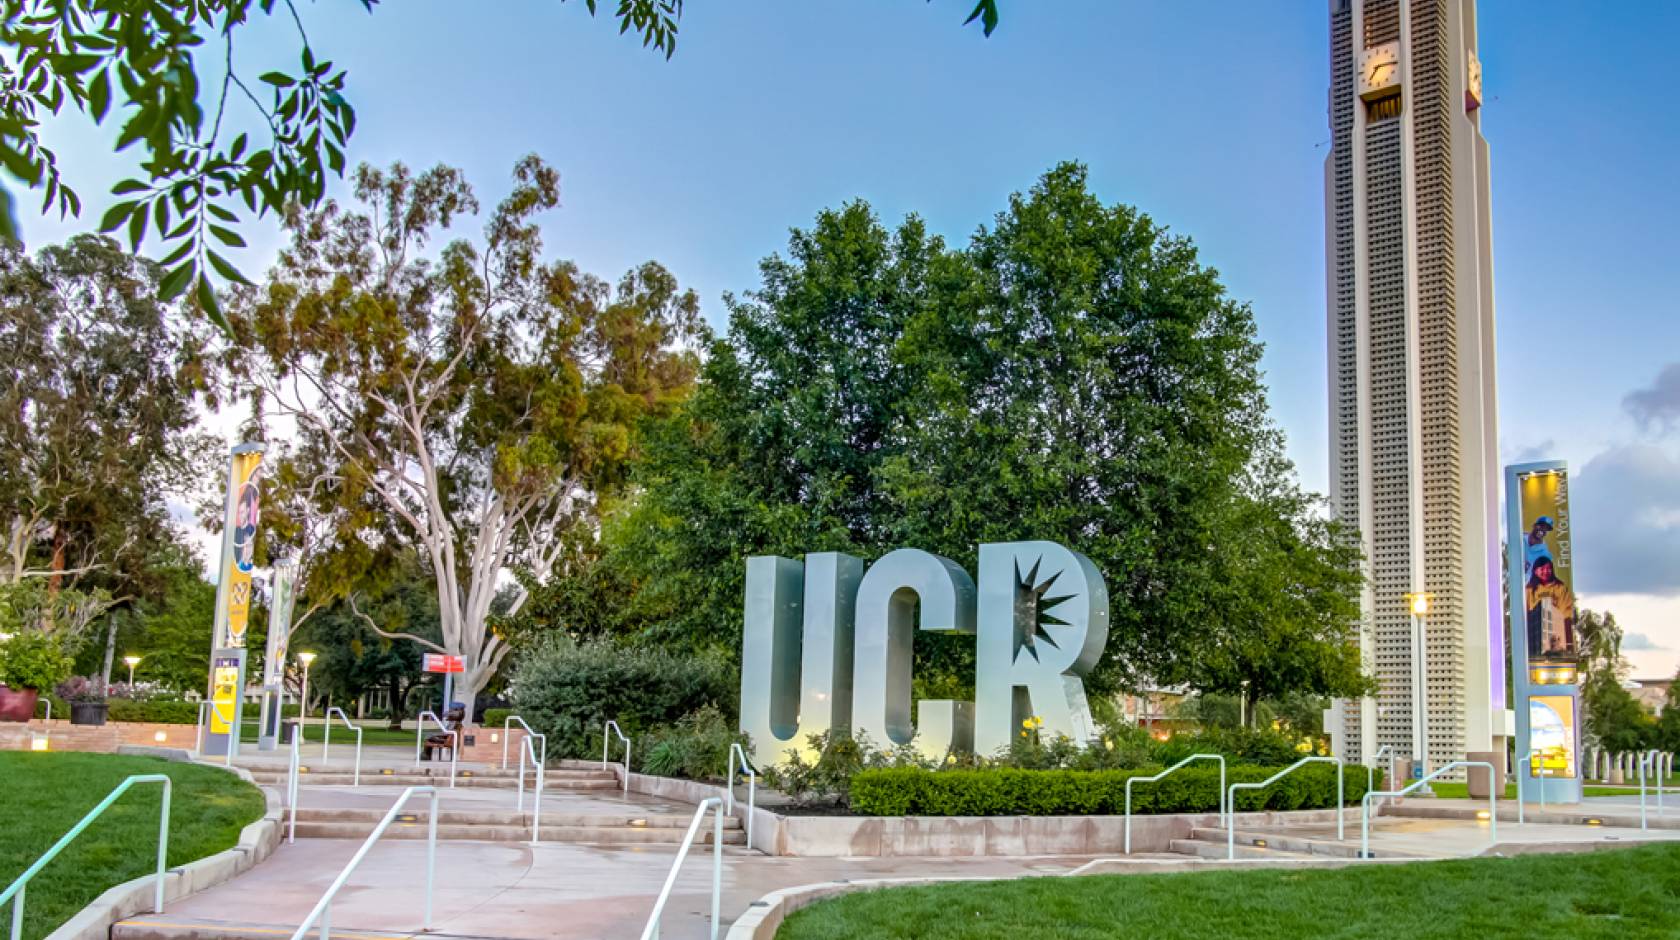 10-ucr-facts